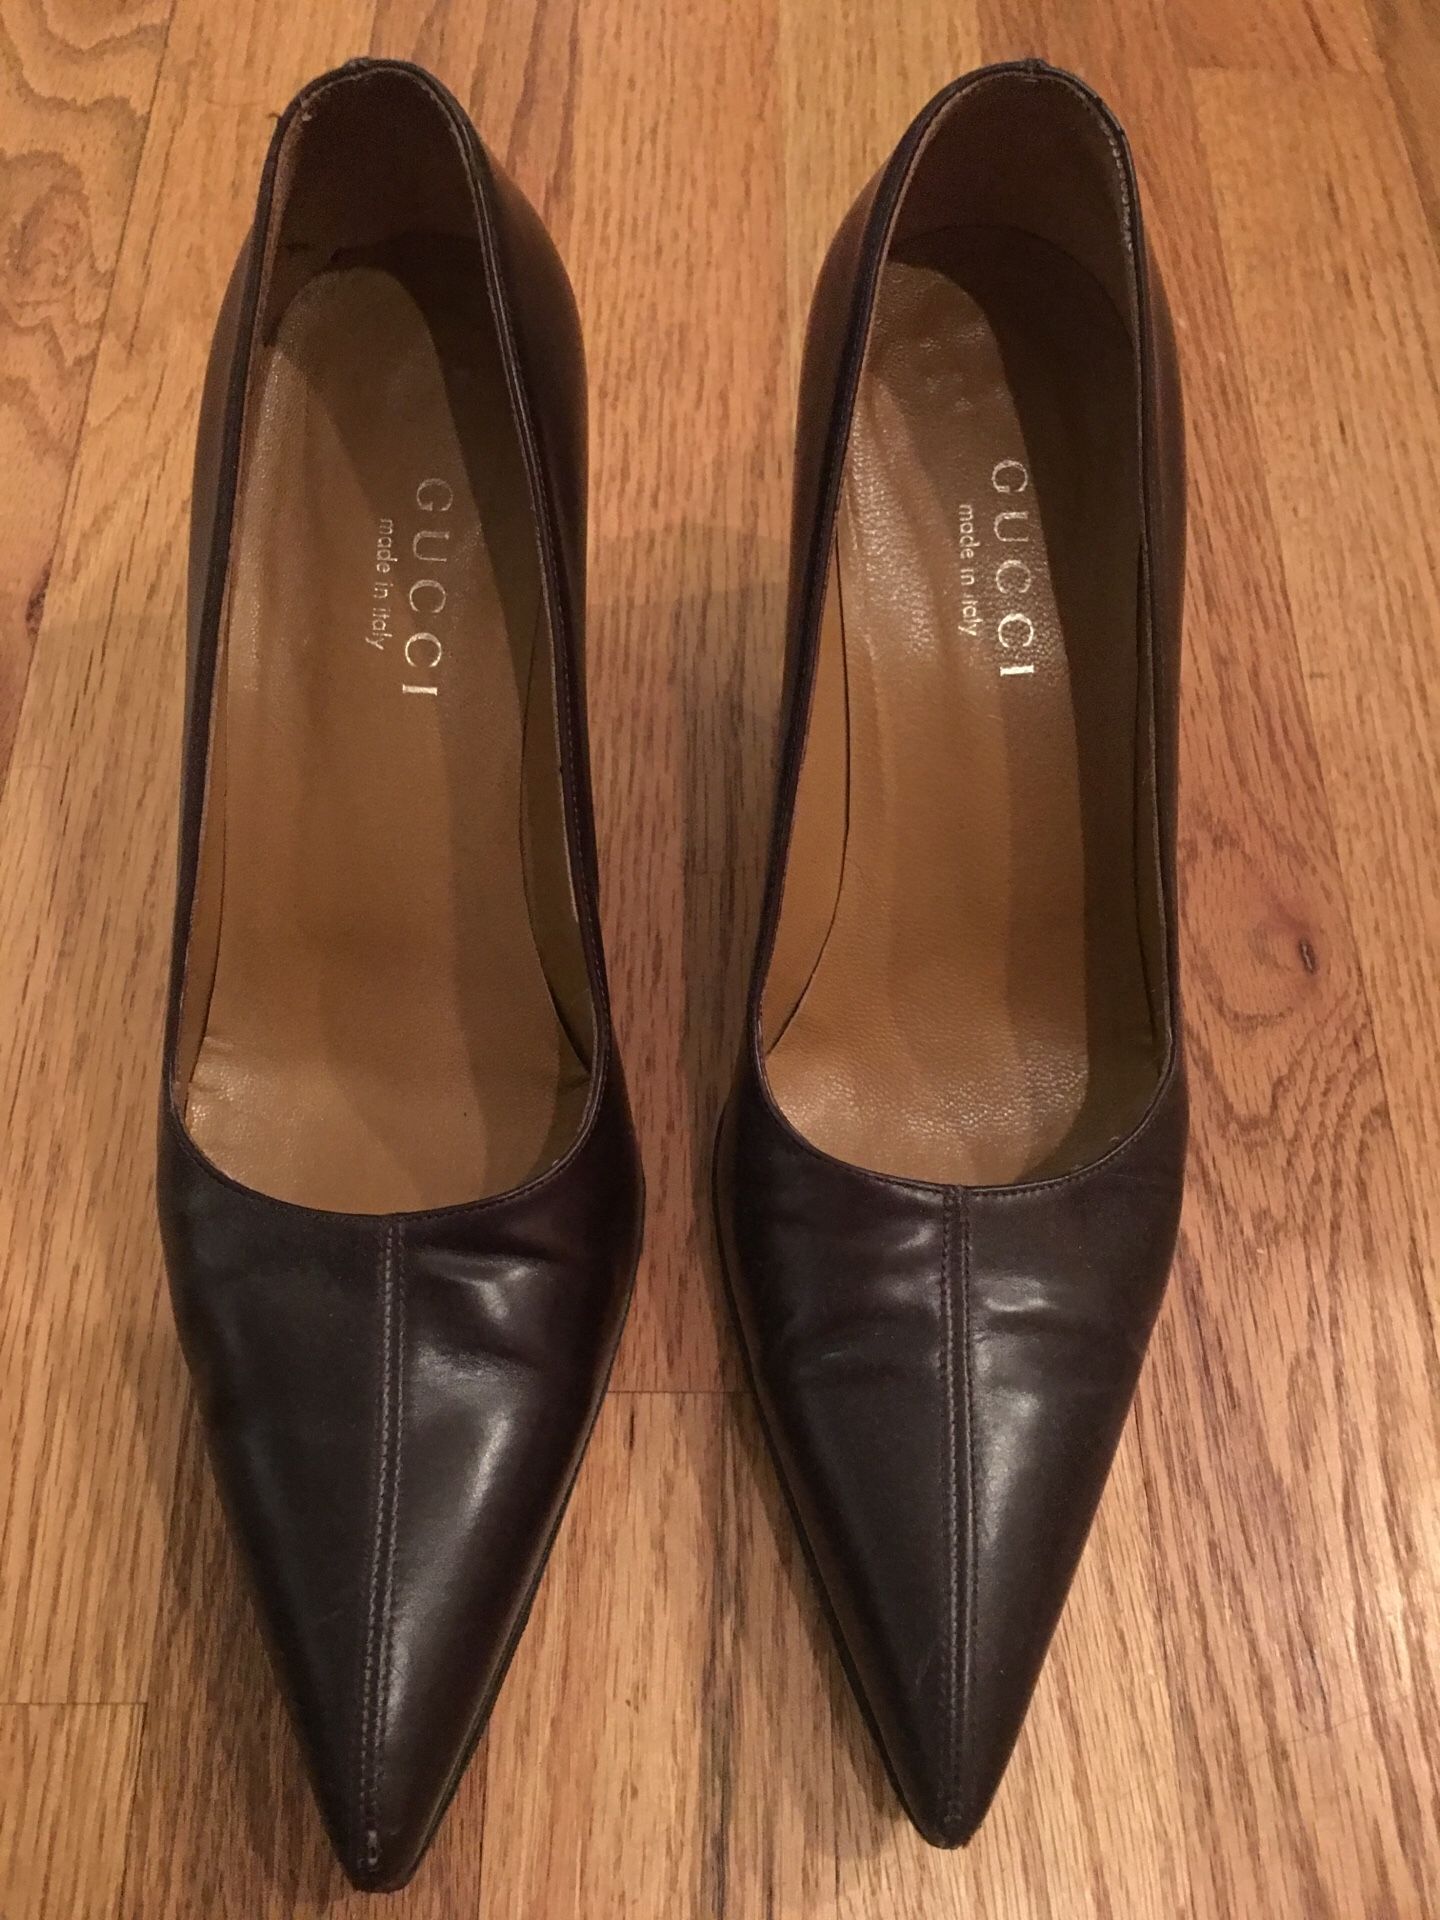 Gucci Brown Leather - Size 9